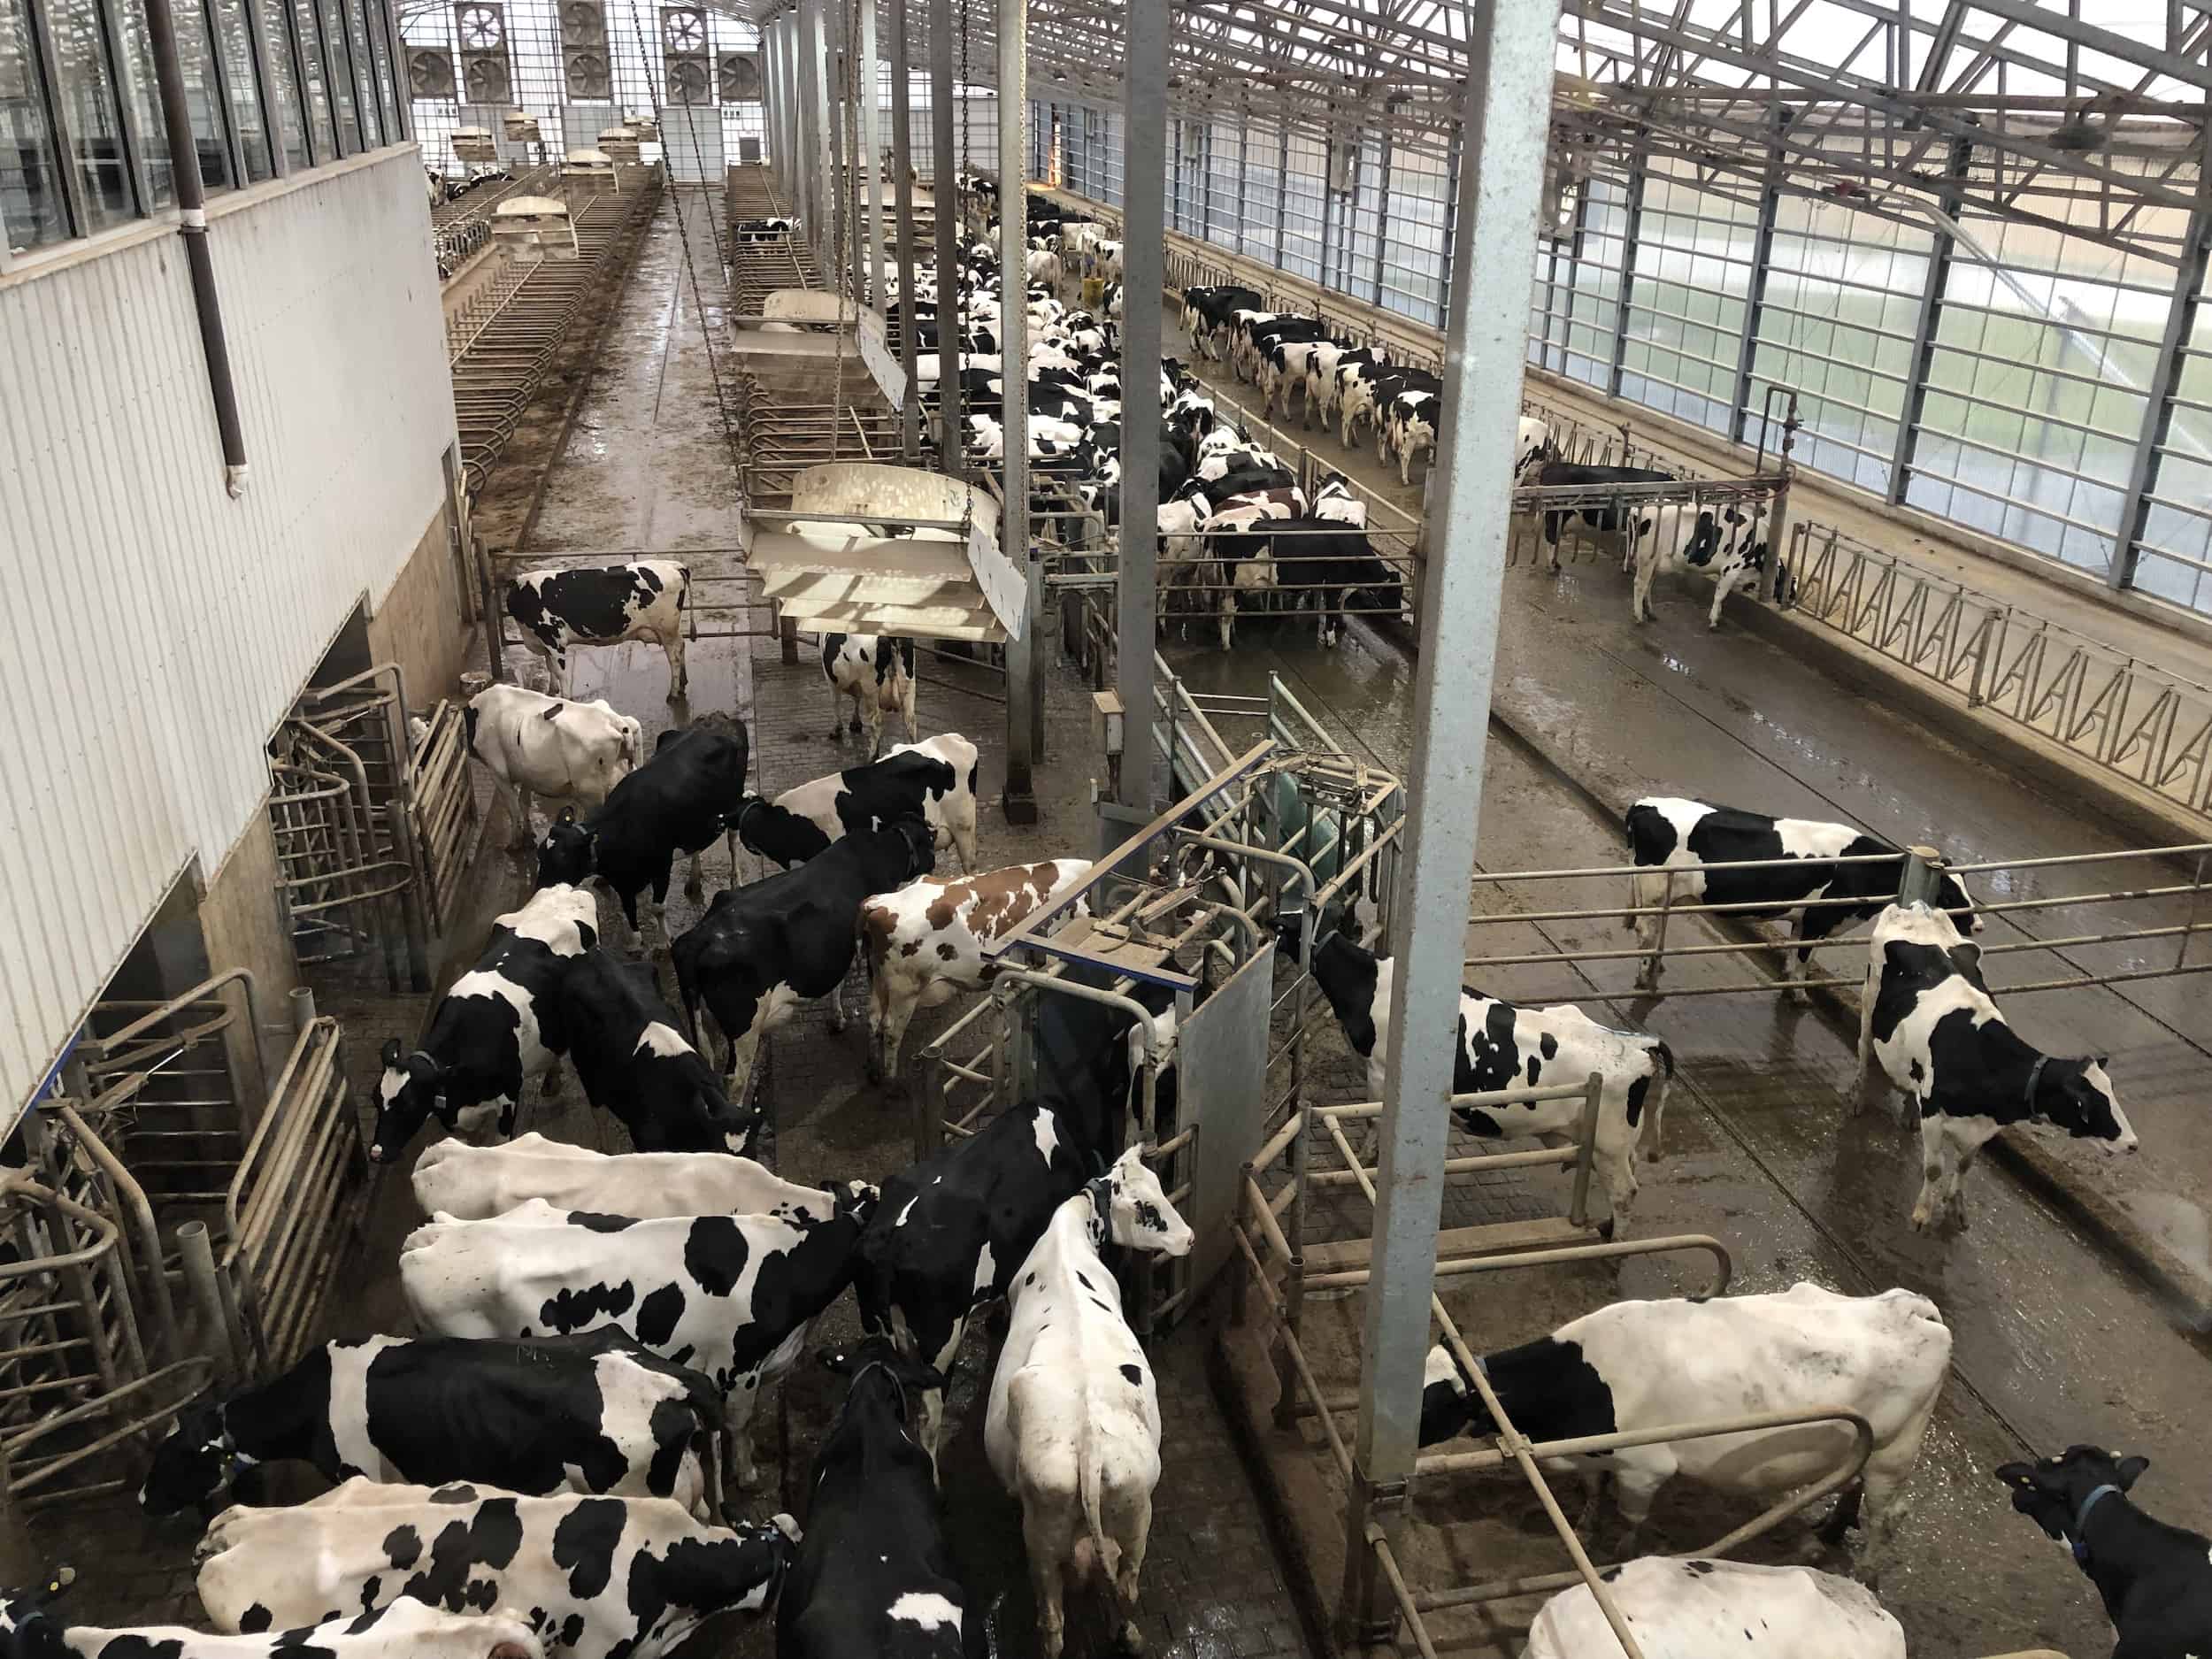 Cows lining up to enter the milking station on the Dairy Adventure at Fair Oaks Farms in Indiana